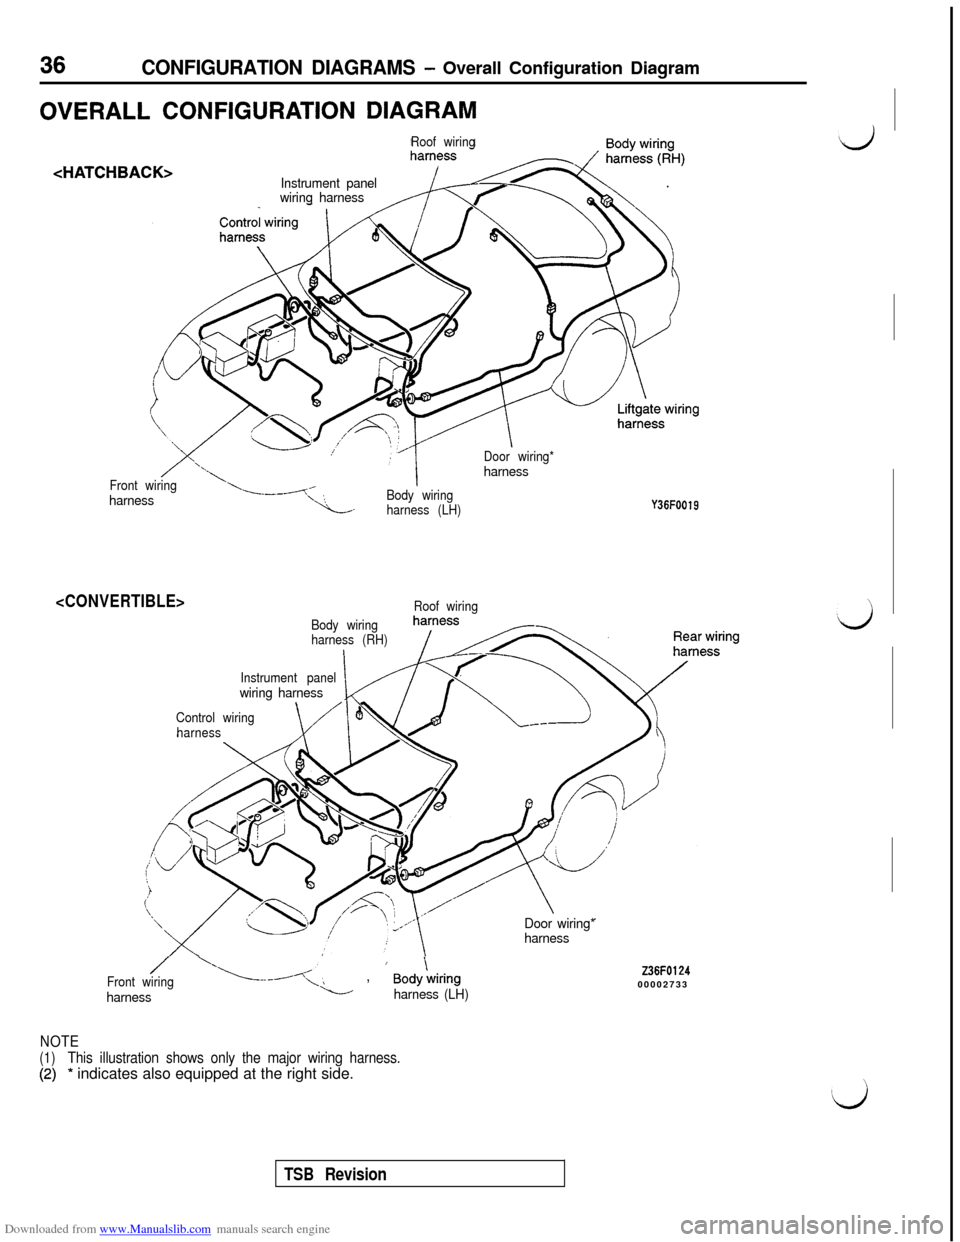 MITSUBISHI 3000GT 1994 2.G Owners Guide Downloaded from www.Manualslib.com manuals search engine 36CONFIGURATION DIAGRAMS - Overall Configuration Diagram
OVERALL CONFIGURATION DIAGRAM
<HAT1
Roof wiring
CHBACK>Instrument panel
wiring harness